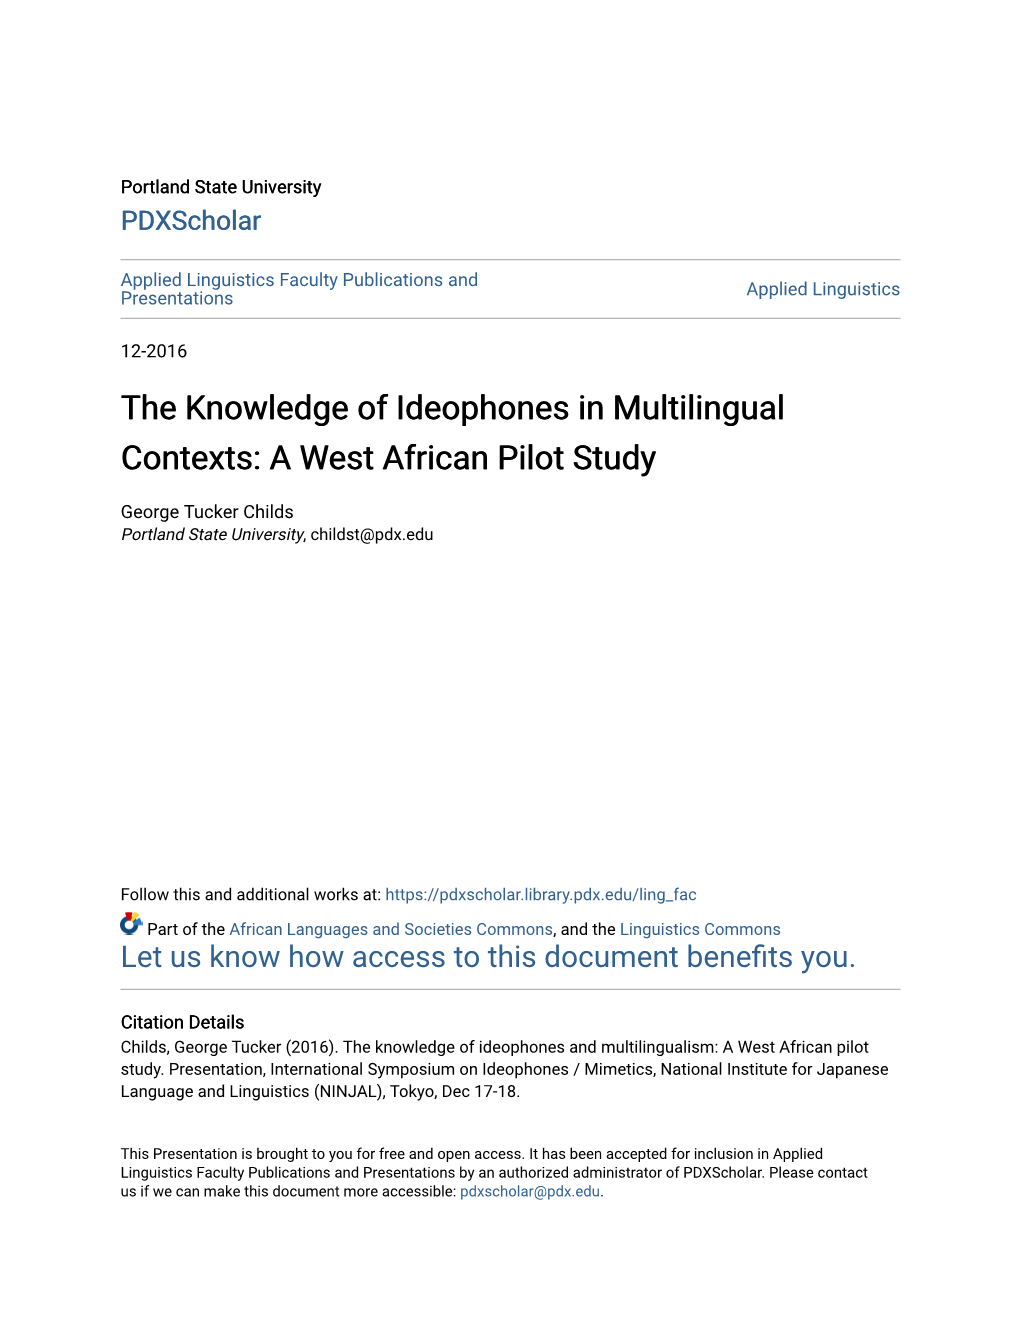 The Knowledge of Ideophones in Multilingual Contexts: a West African Pilot Study